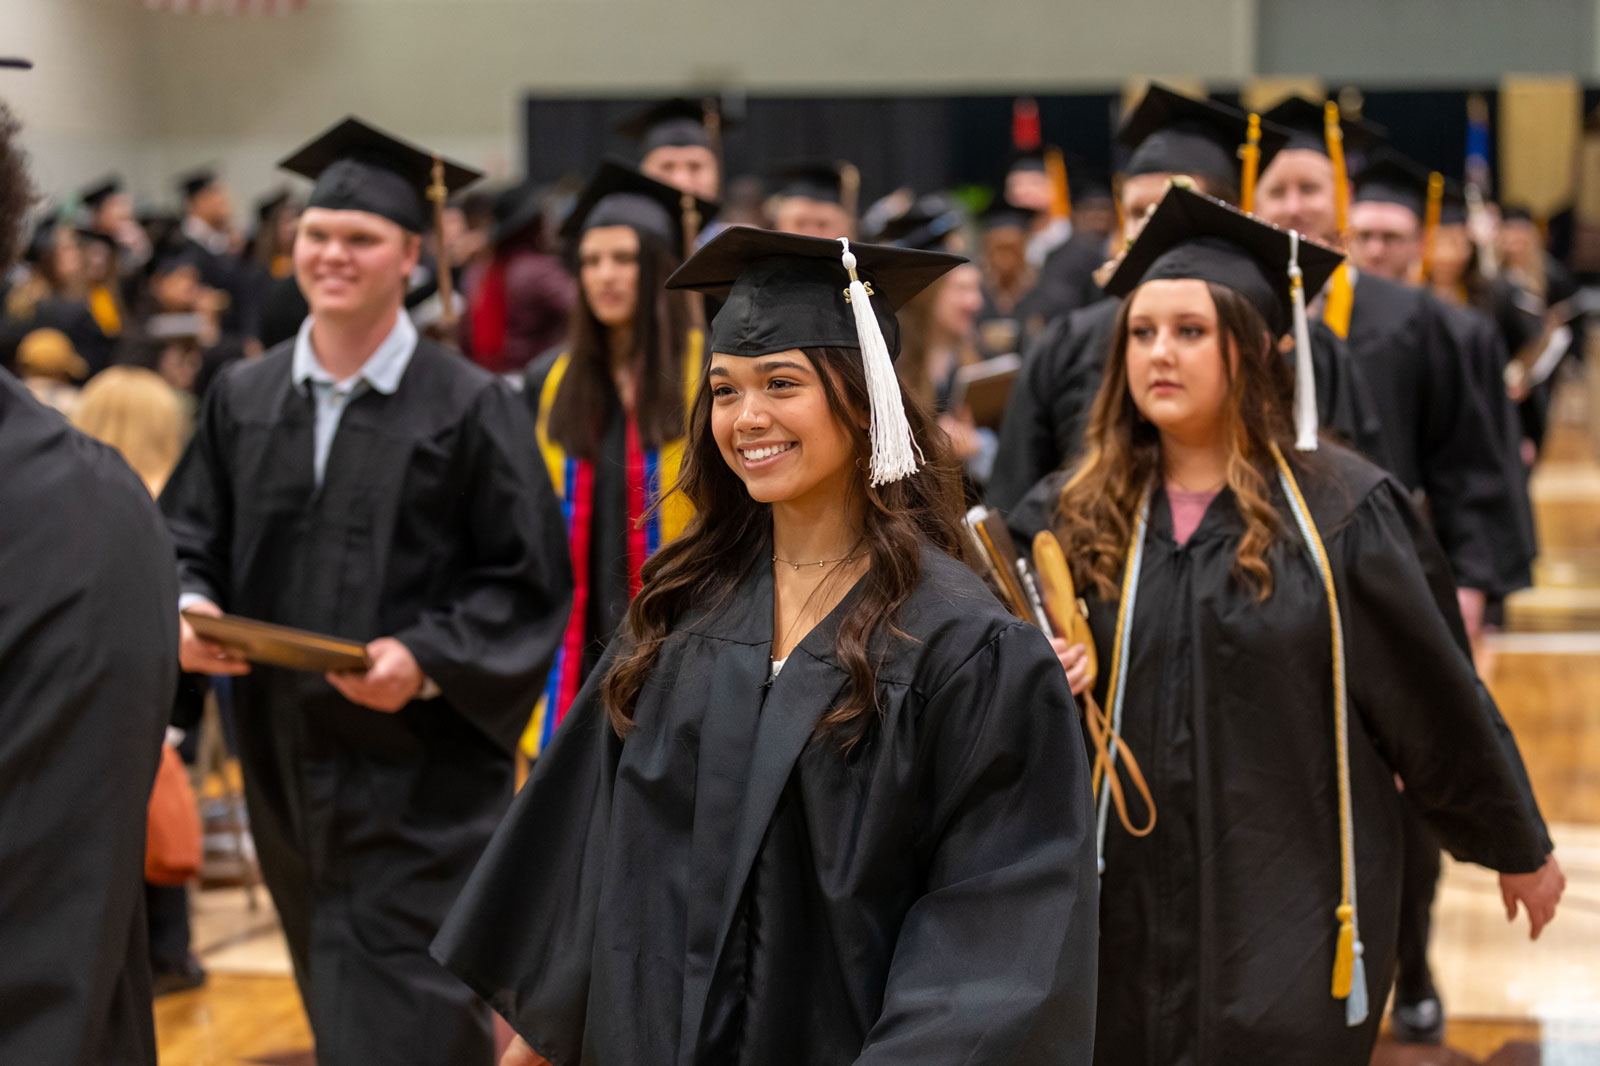 SMSU Commencement is May 6